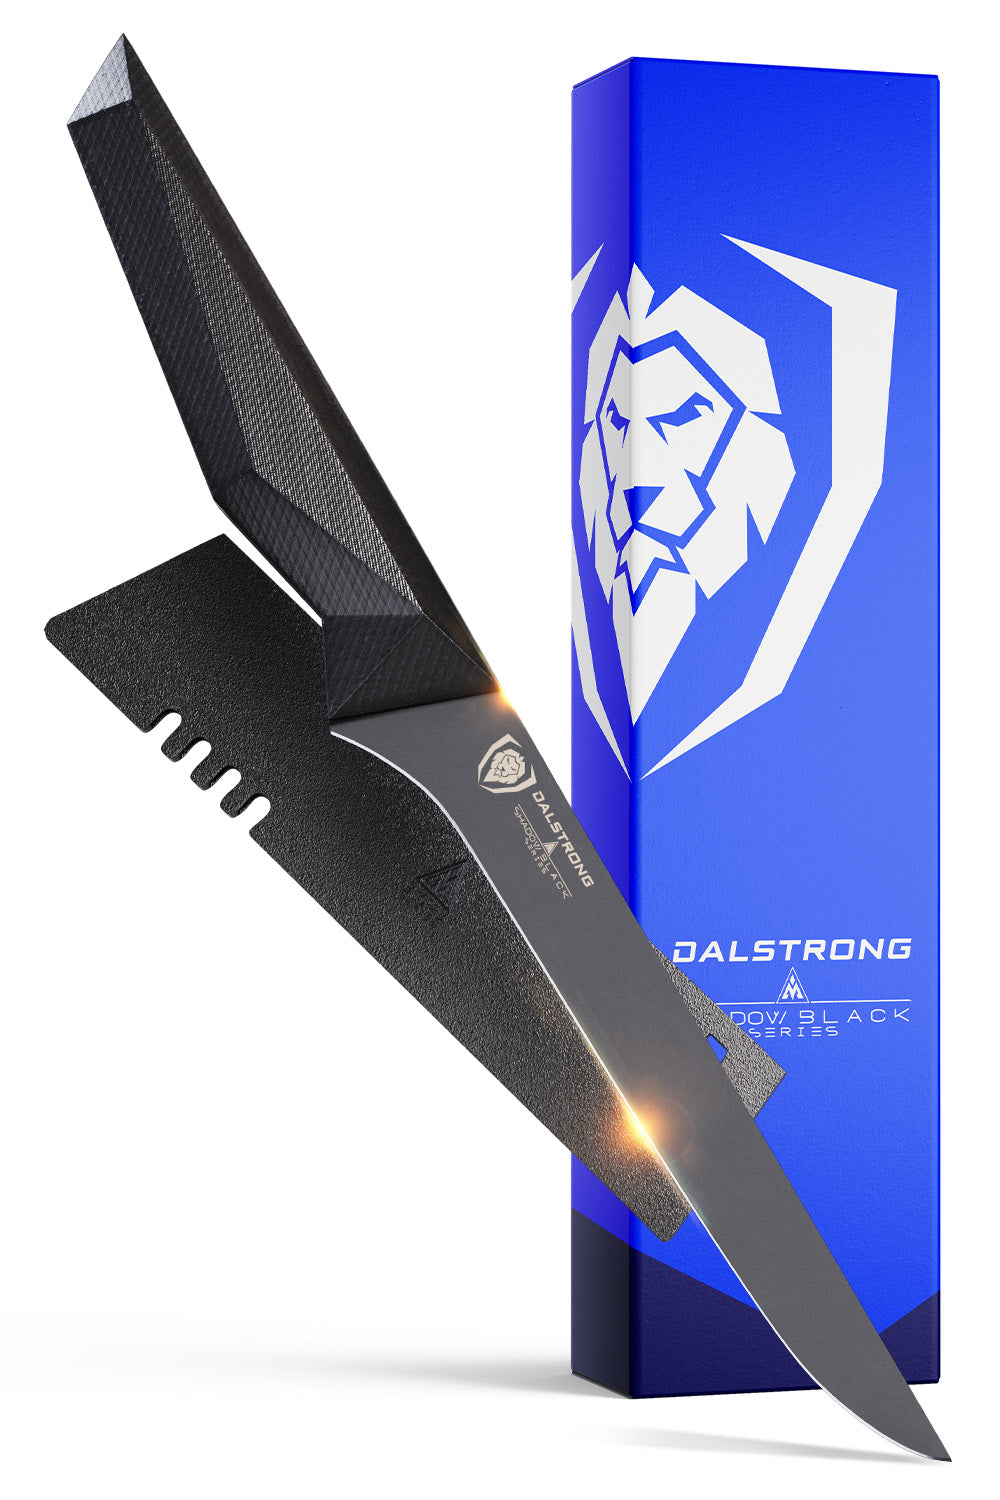 Straight Boning Knife 6" | Shadow Black Series | NSF Certified | Dalstrong ©